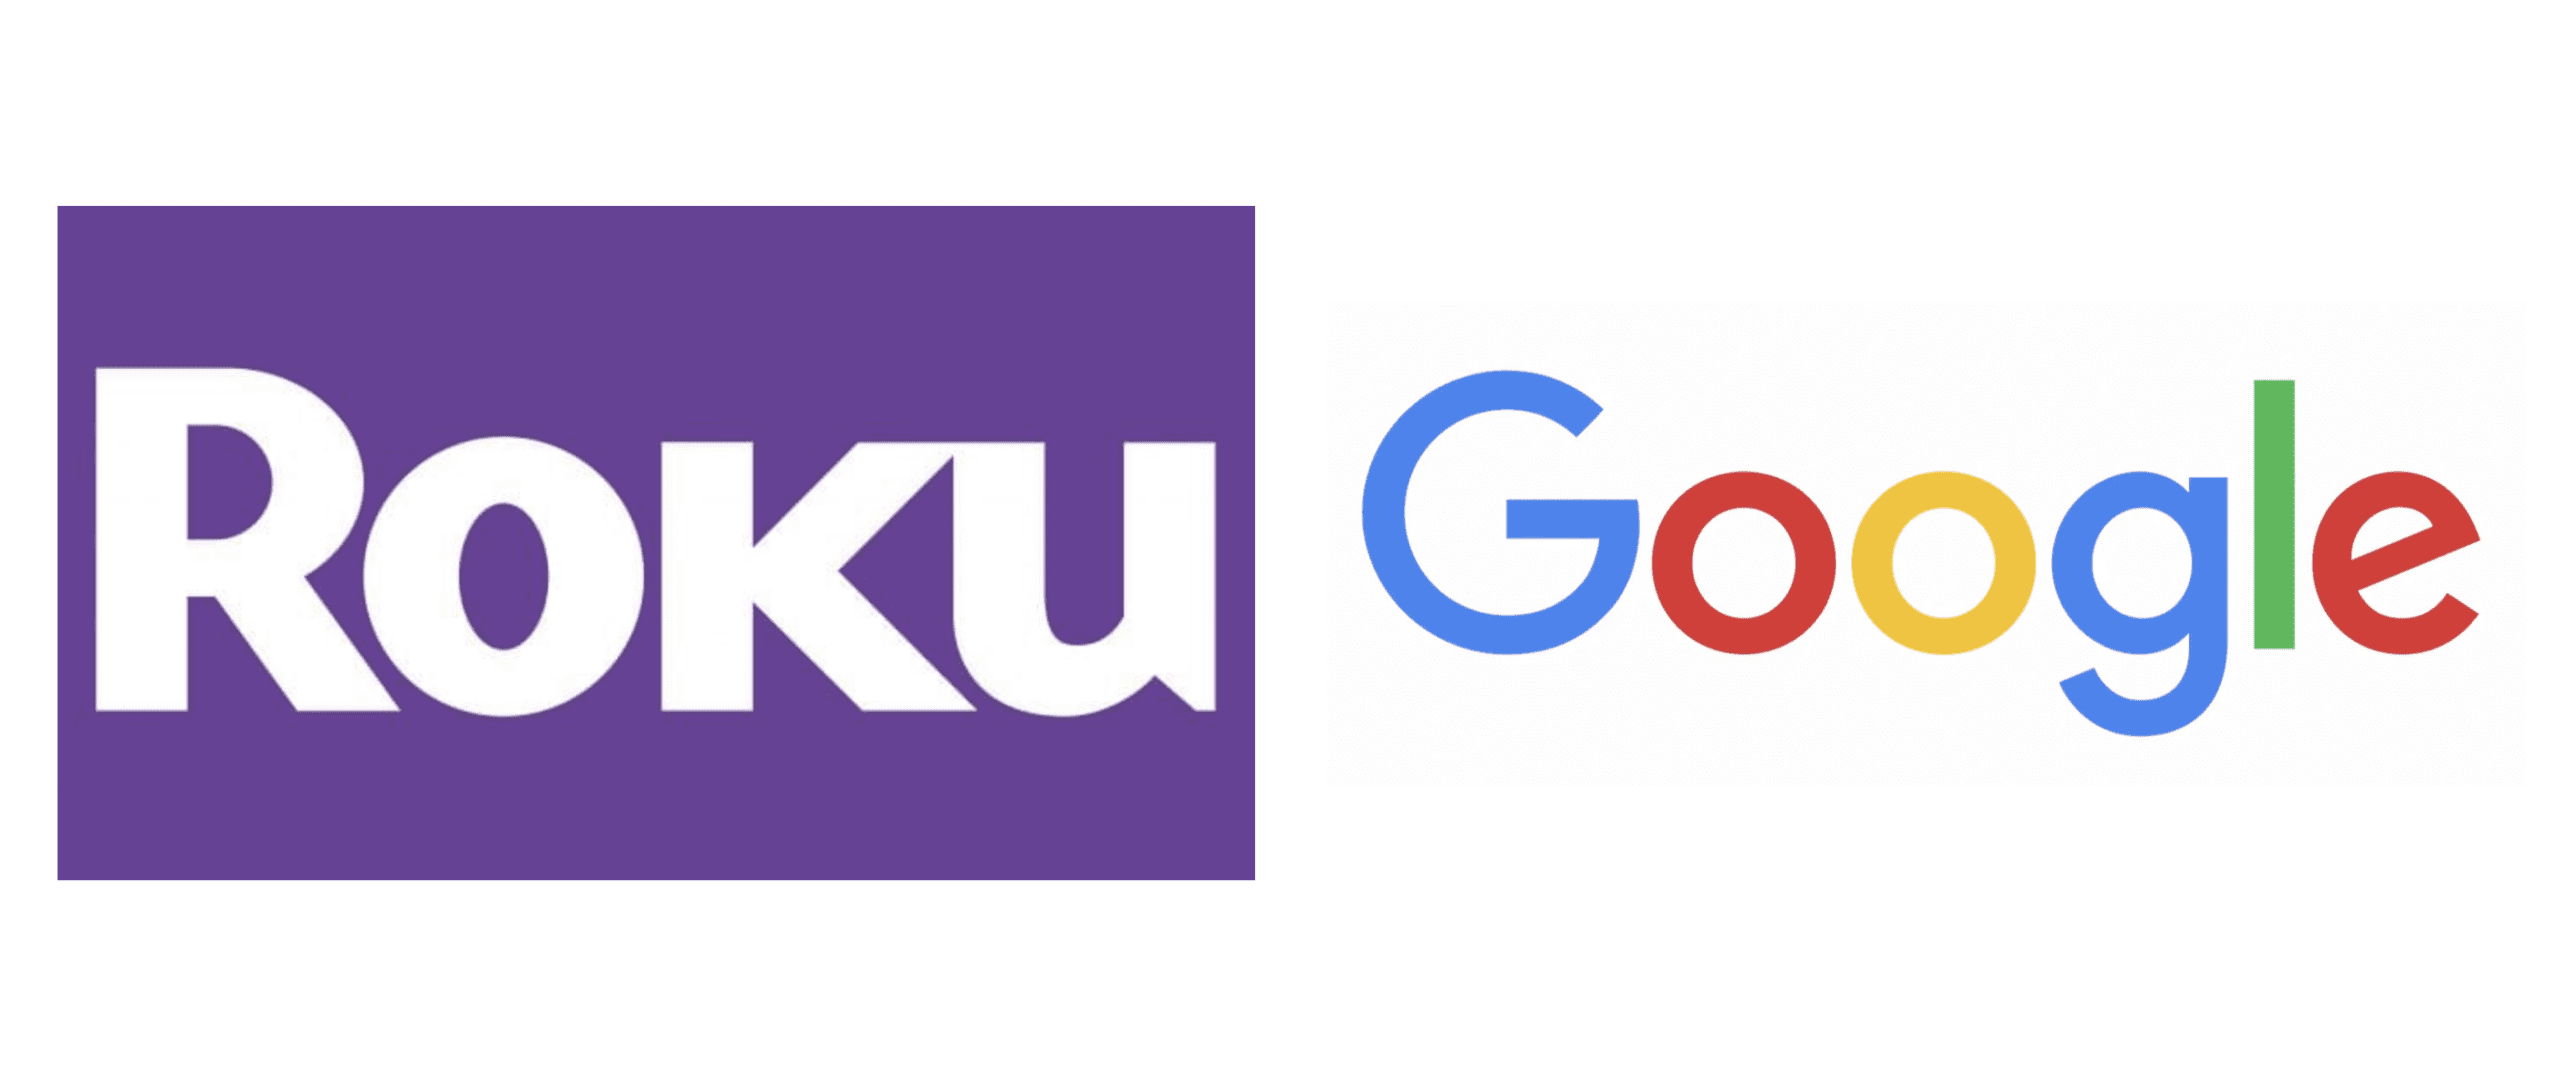 The Roku Deal with Google: Advertiser Q&A